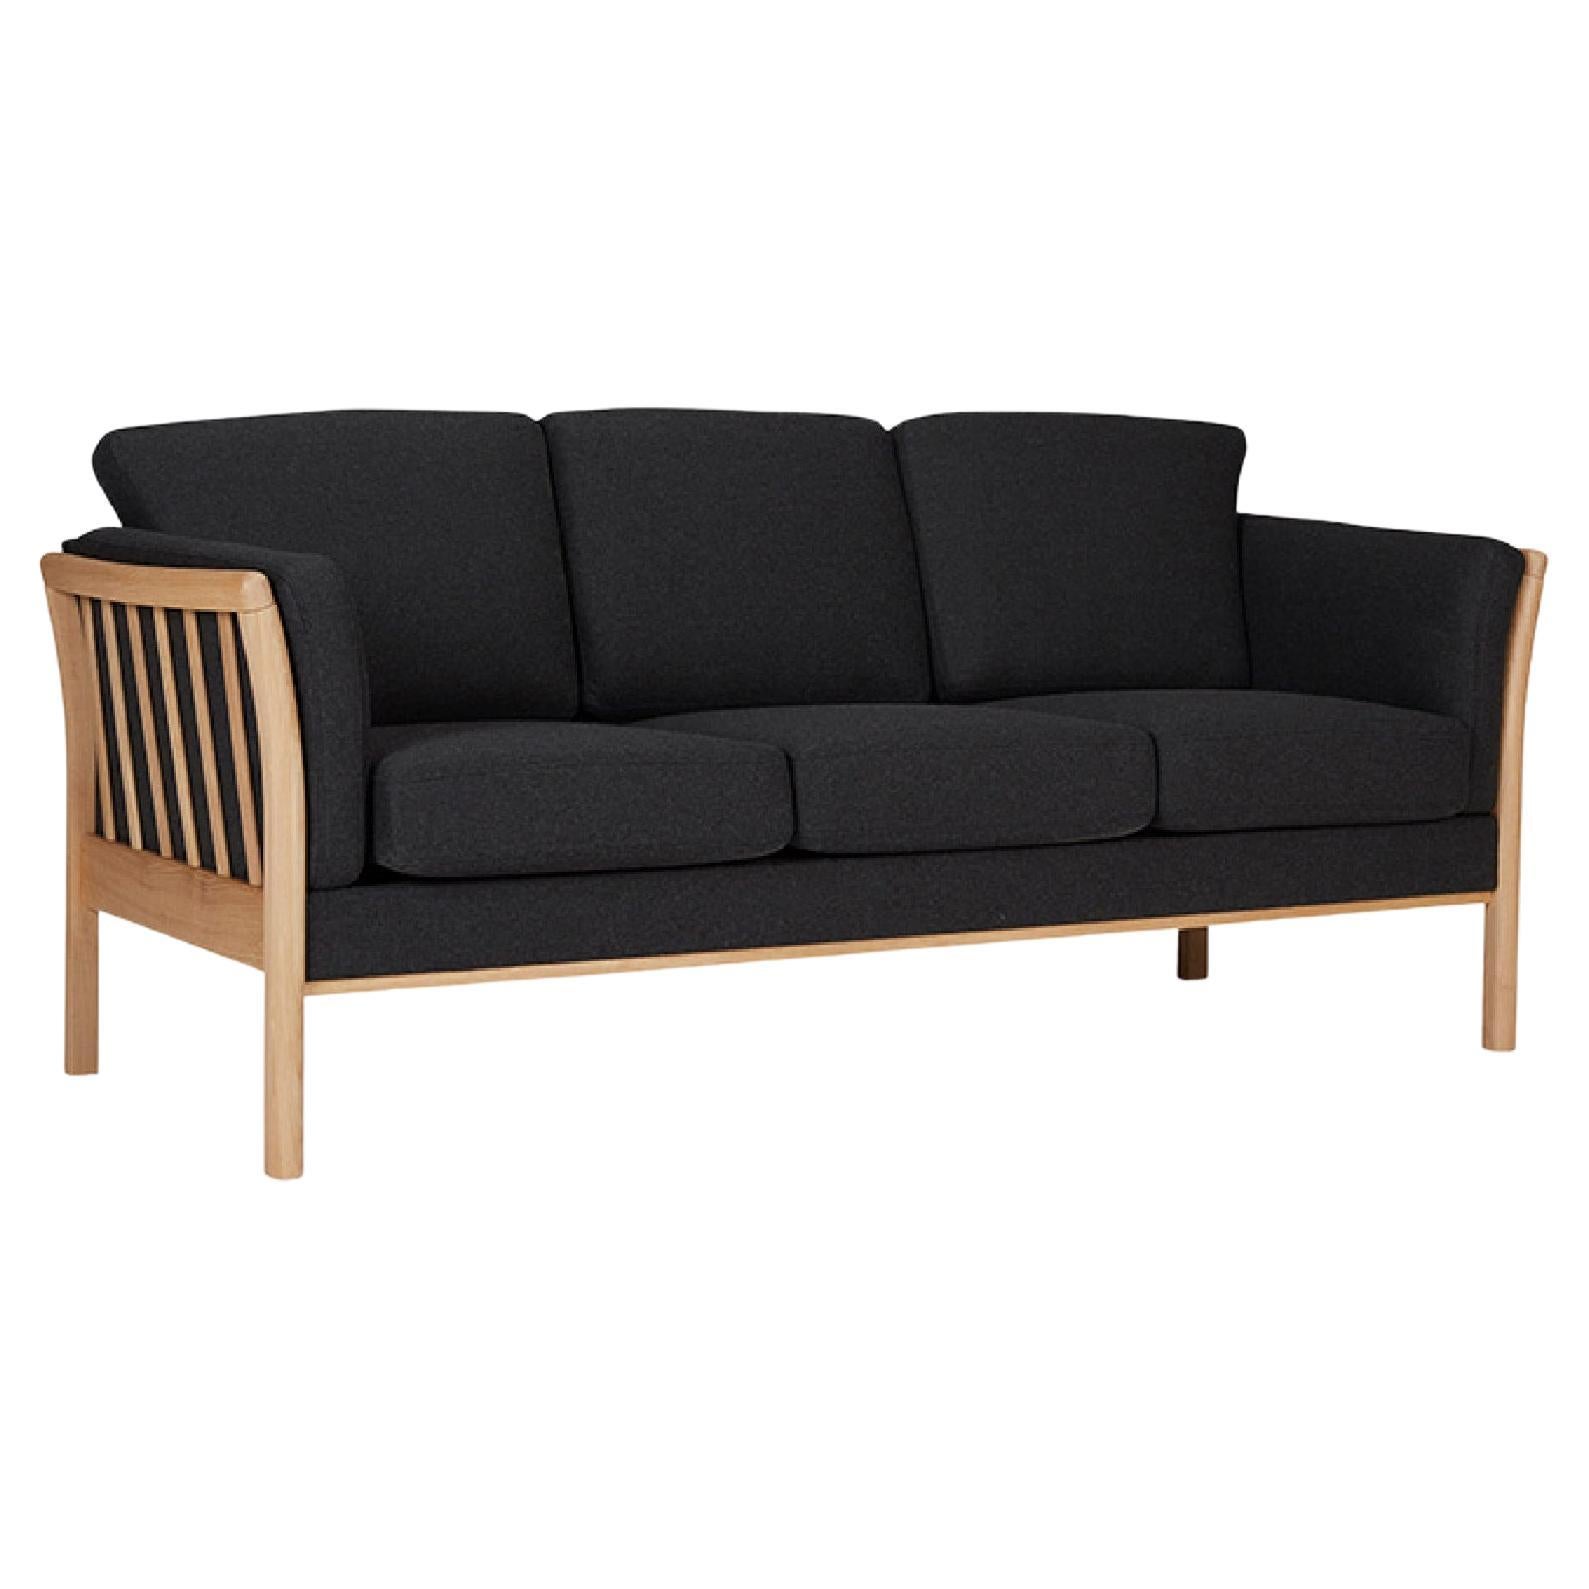  Hayche Oscar 3 Seater Sofa - Black, UK, Made to Order For Sale